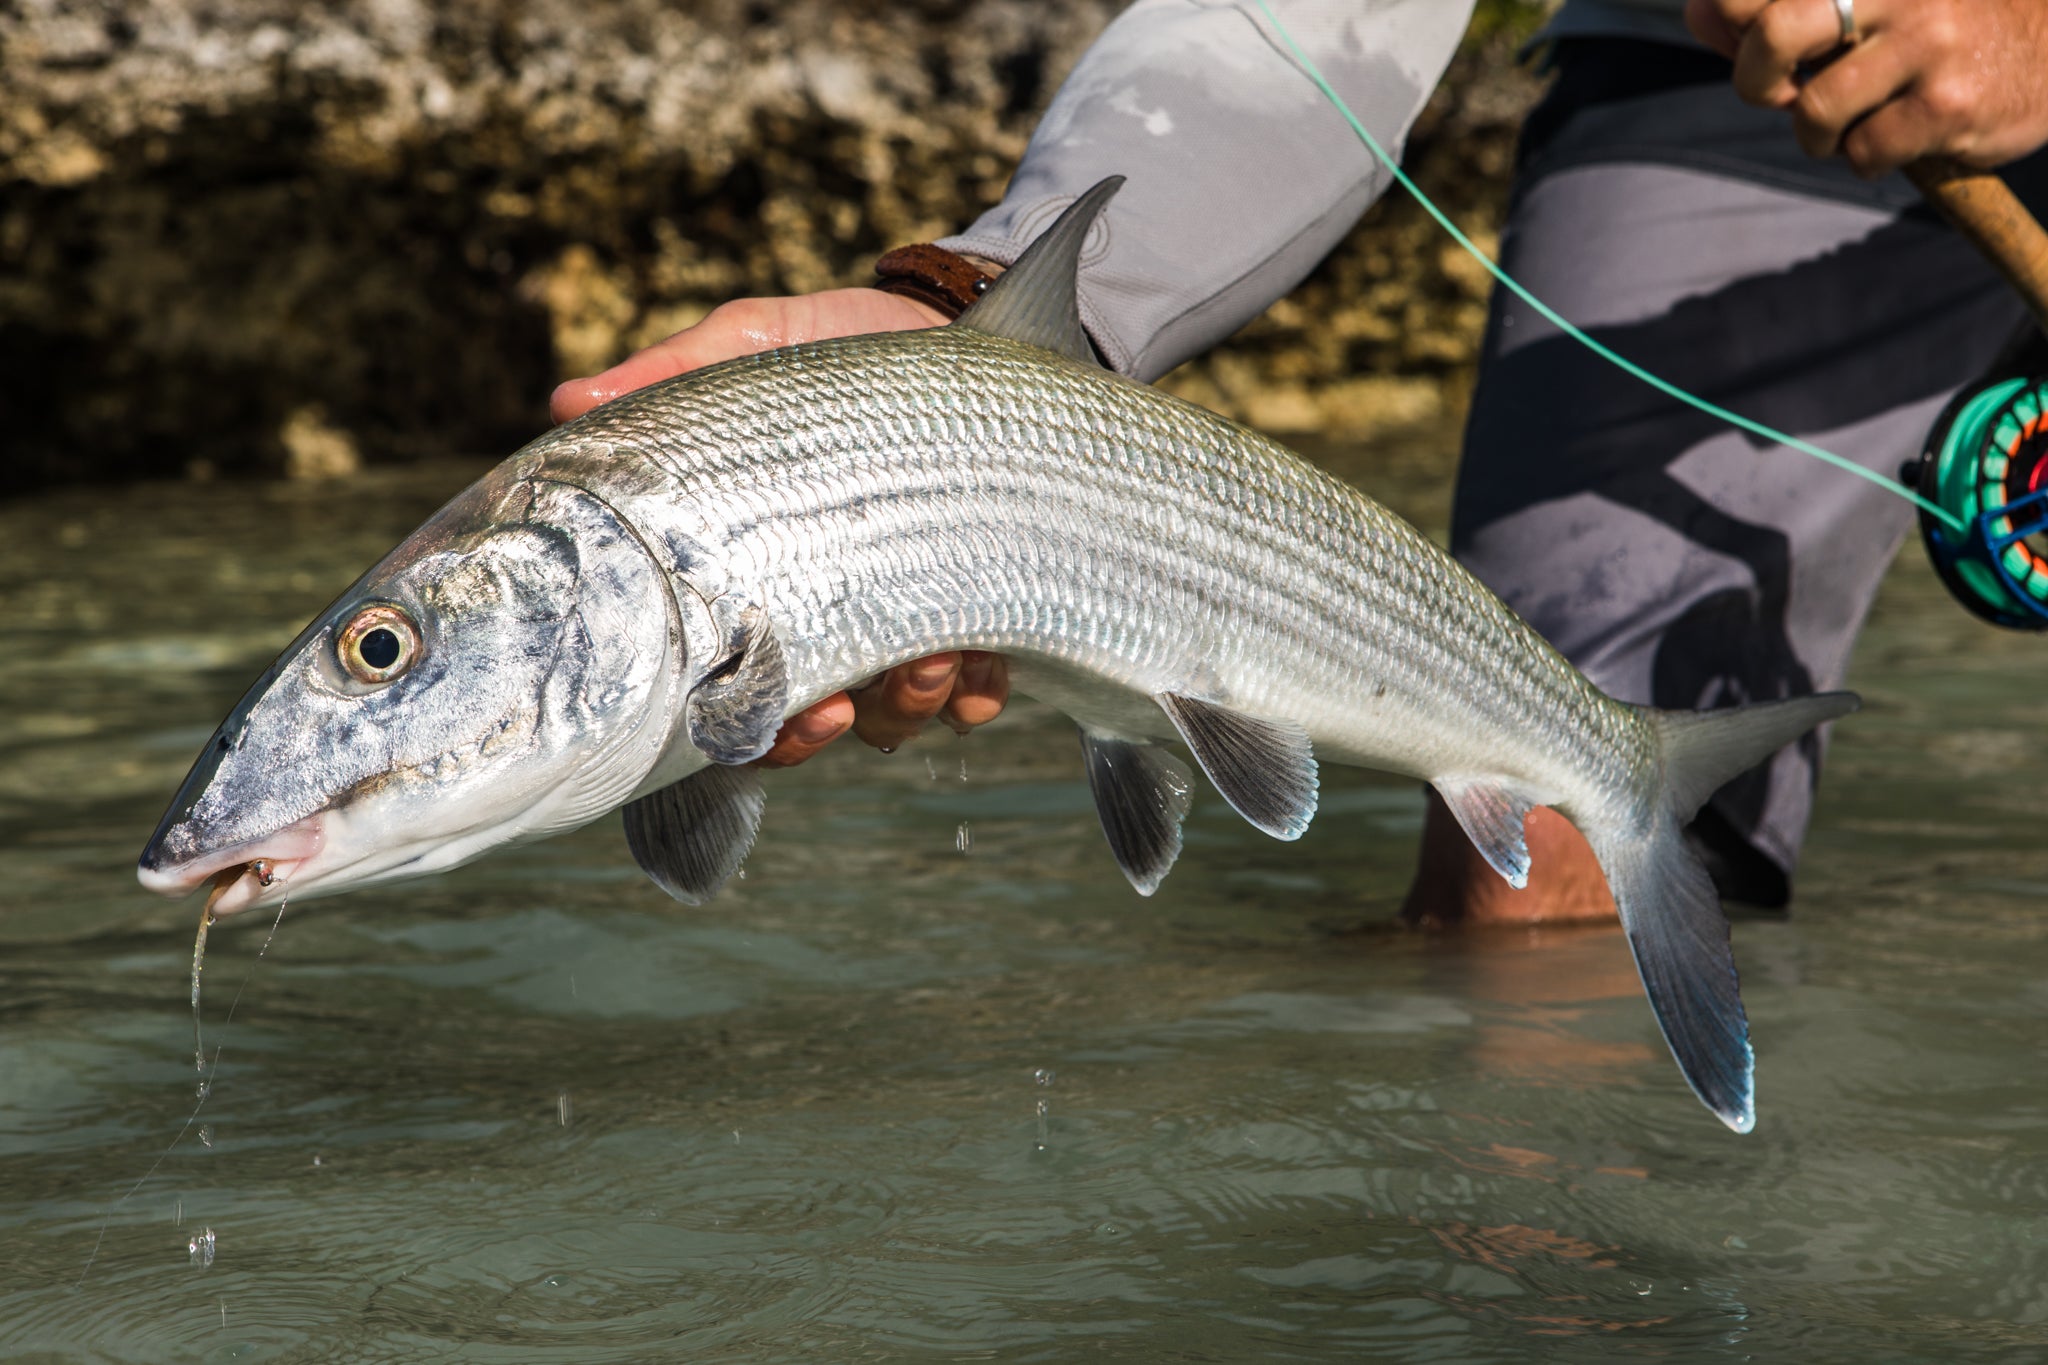 SPORTSMAN'S GUIDE, Fly fishing is less about fish, more about the angler